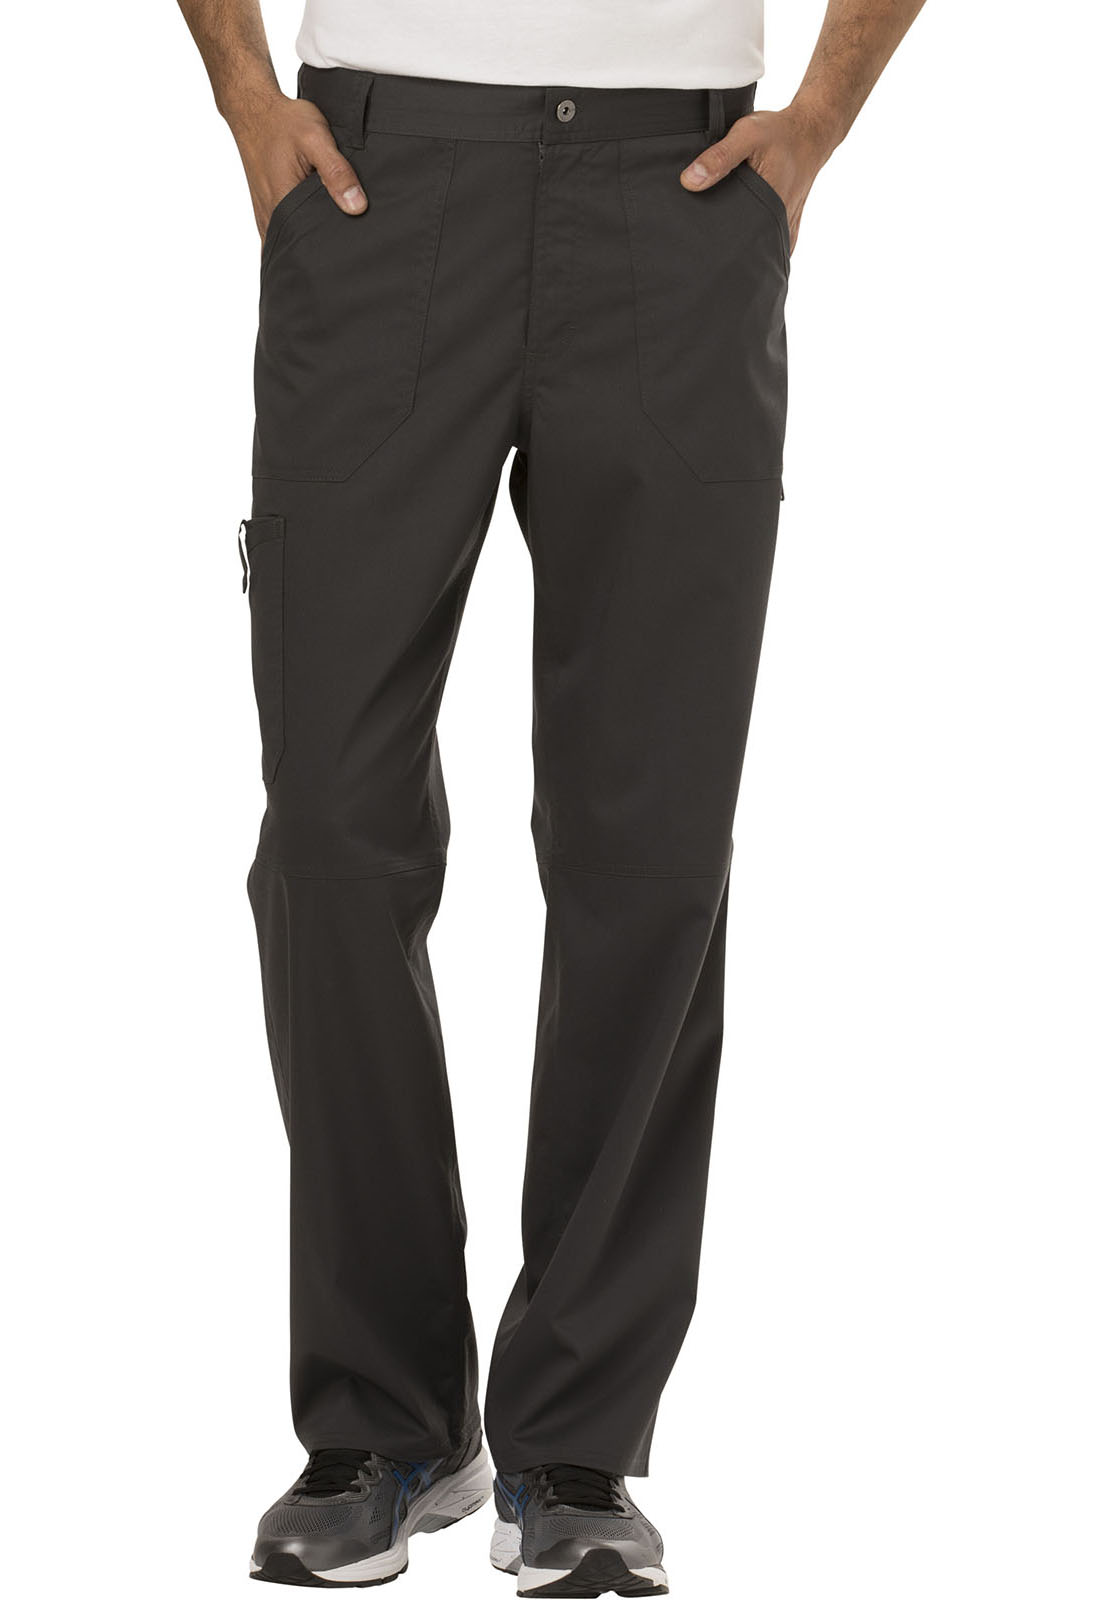 Cherokee Revolution Men's Fly Front Pant WW140T Tall